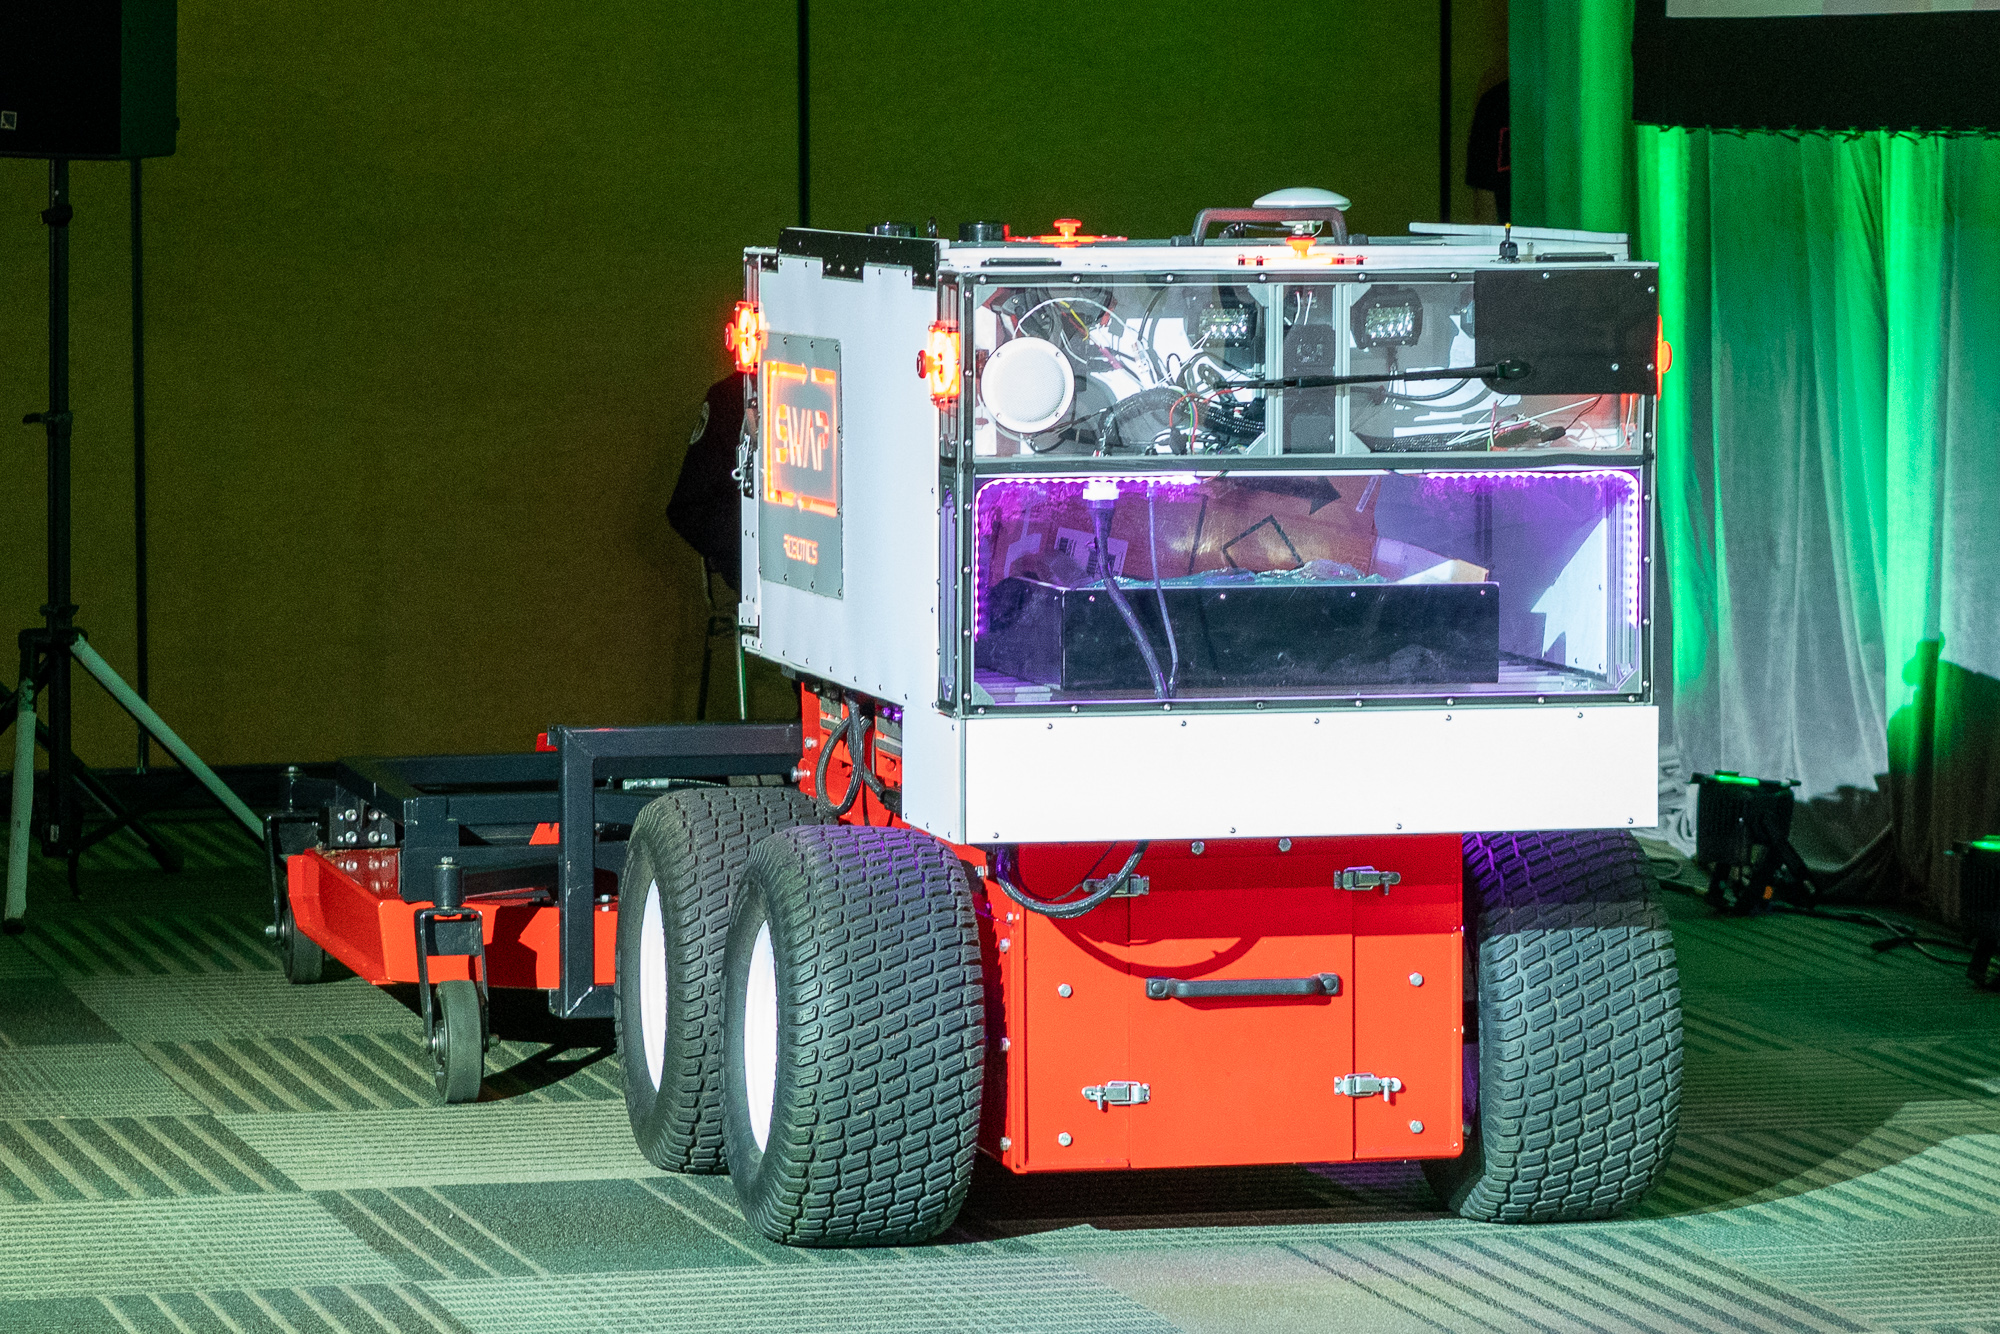 Swap Robotics is paving the way for electric solar vegetation cuts and sidewalk snow plowing